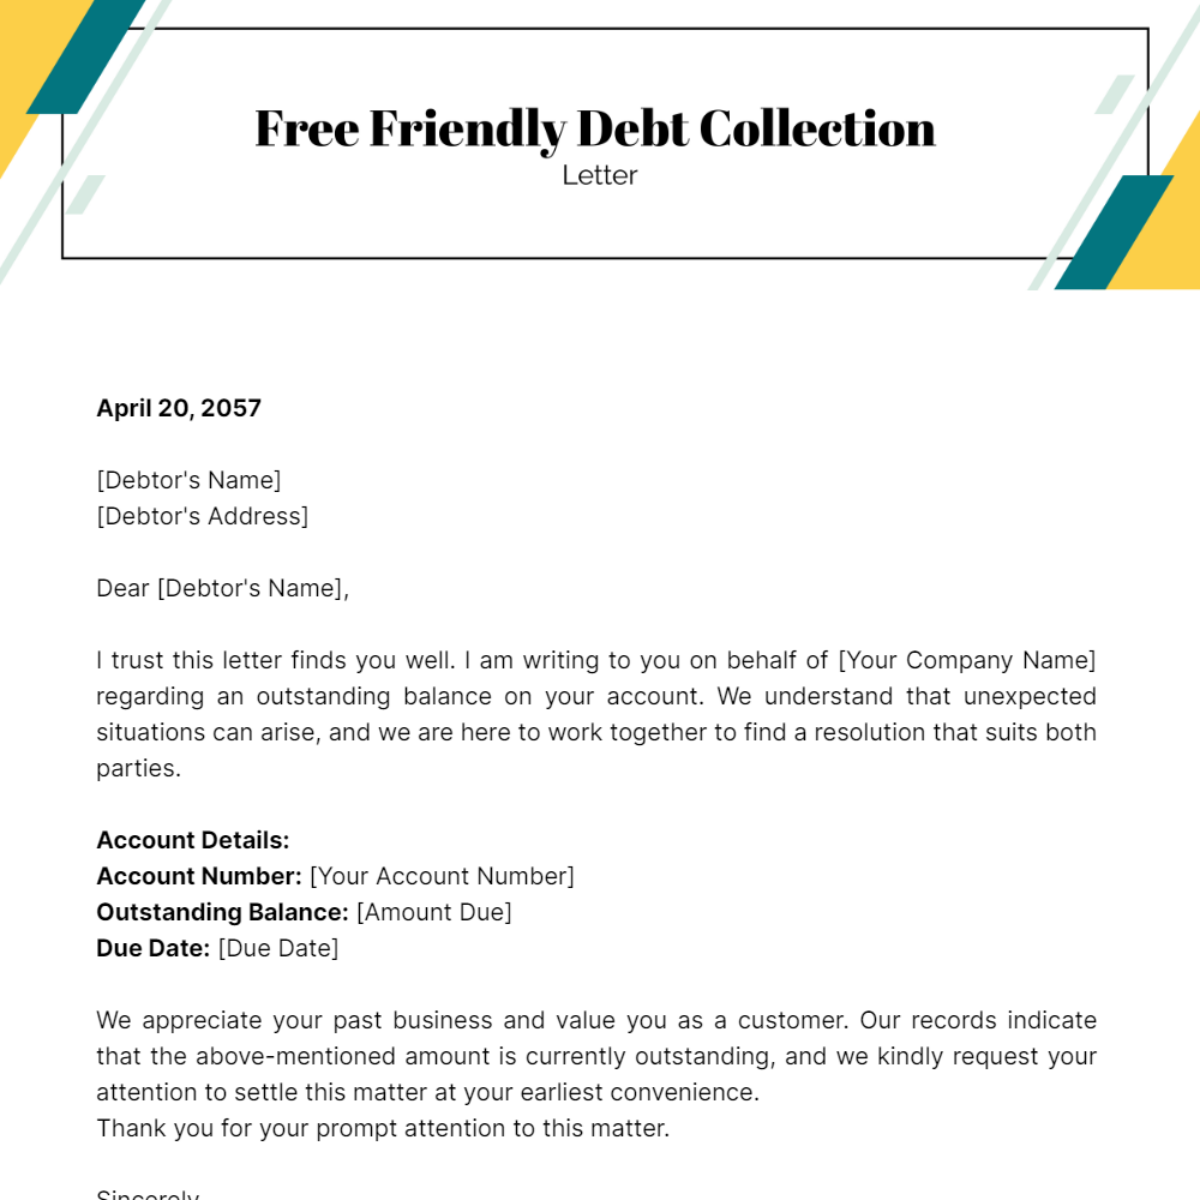 Friendly Debt Collection Letter Template